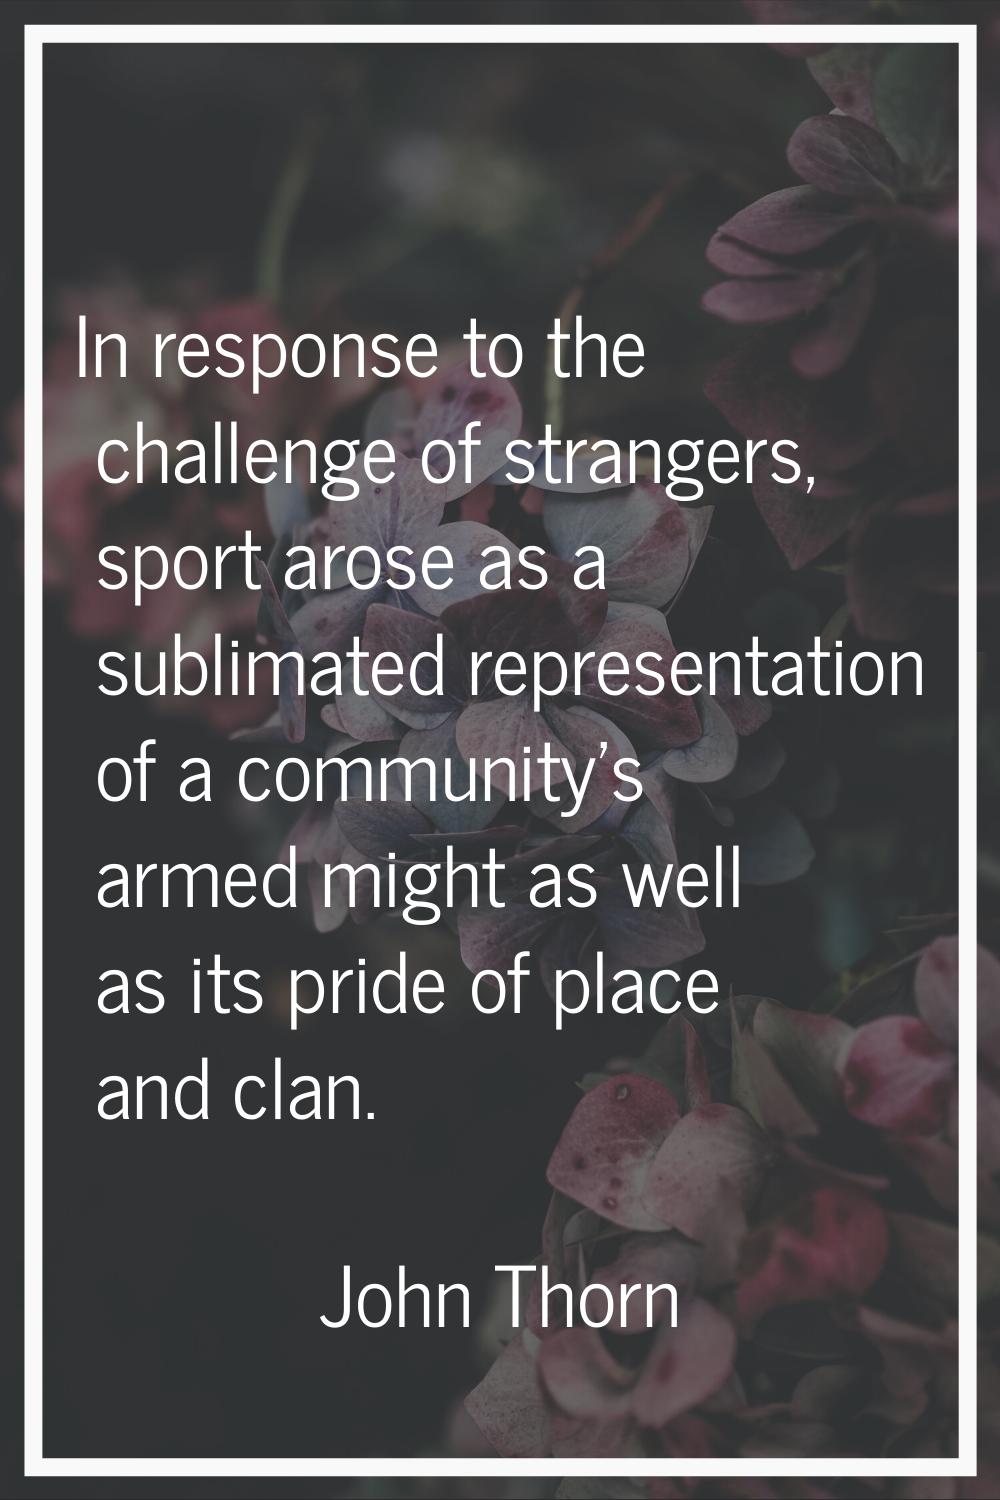 In response to the challenge of strangers, sport arose as a sublimated representation of a communit